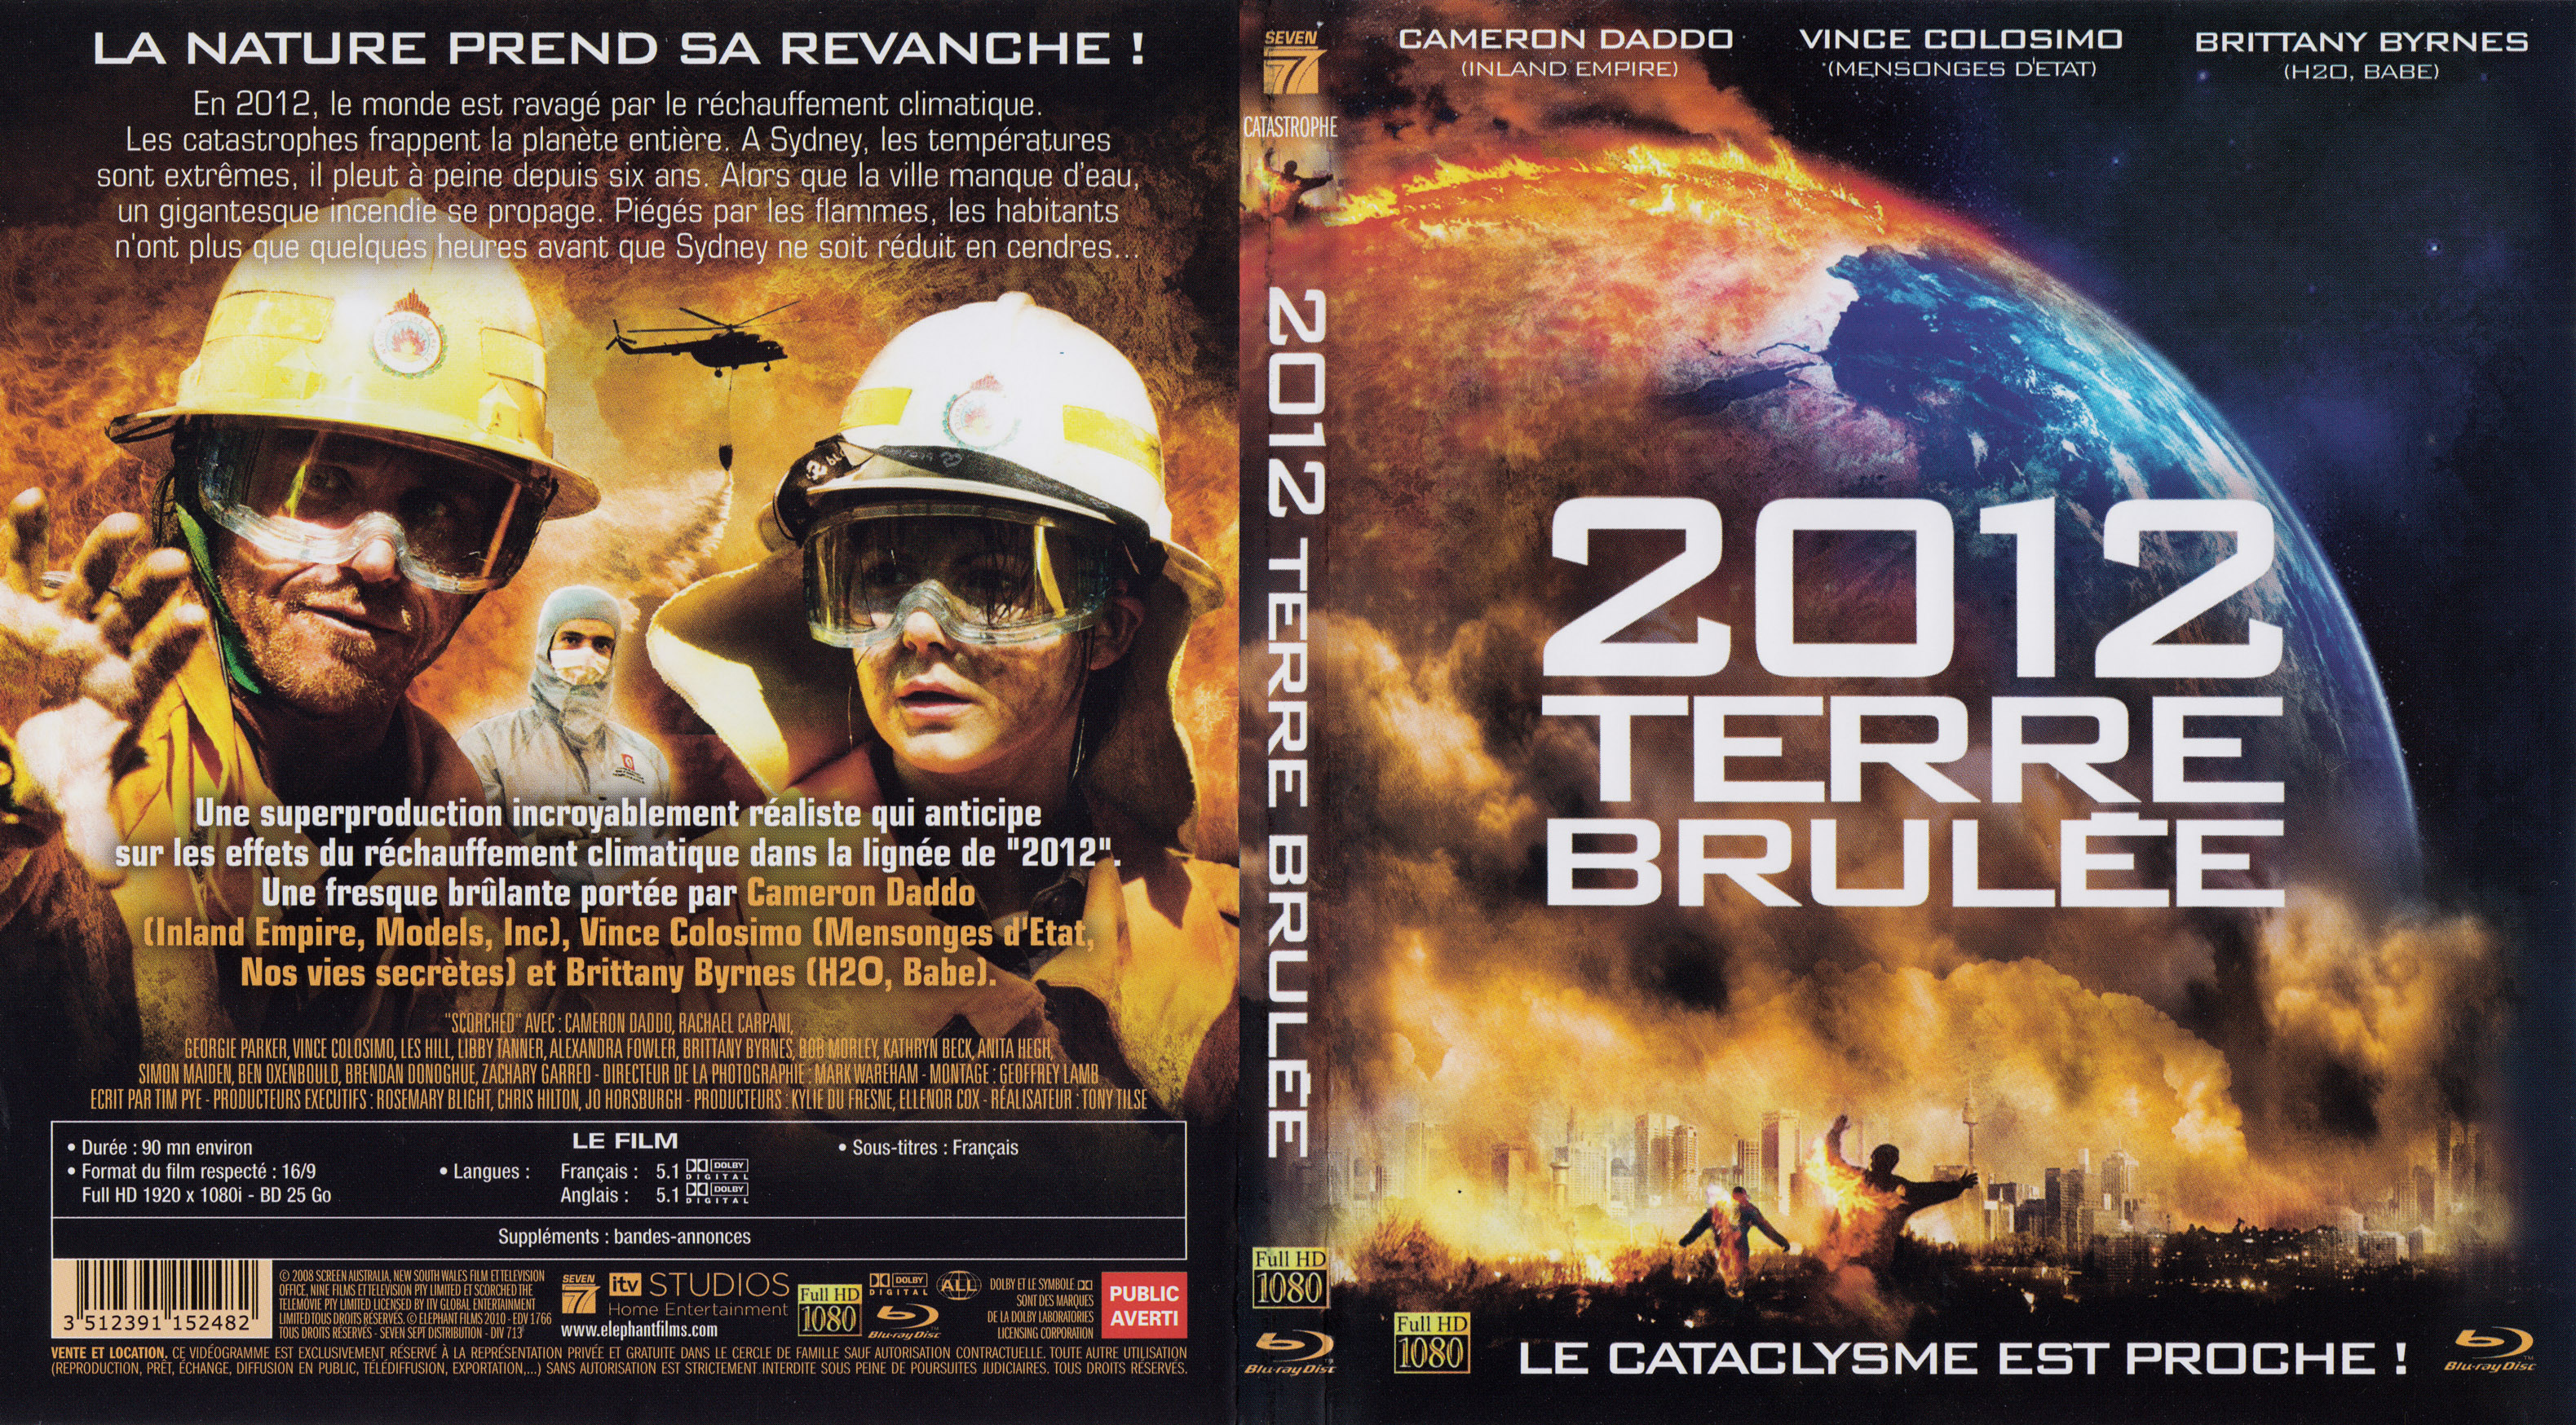 Jaquette DVD 2012 terre brule (BLU-RAY)